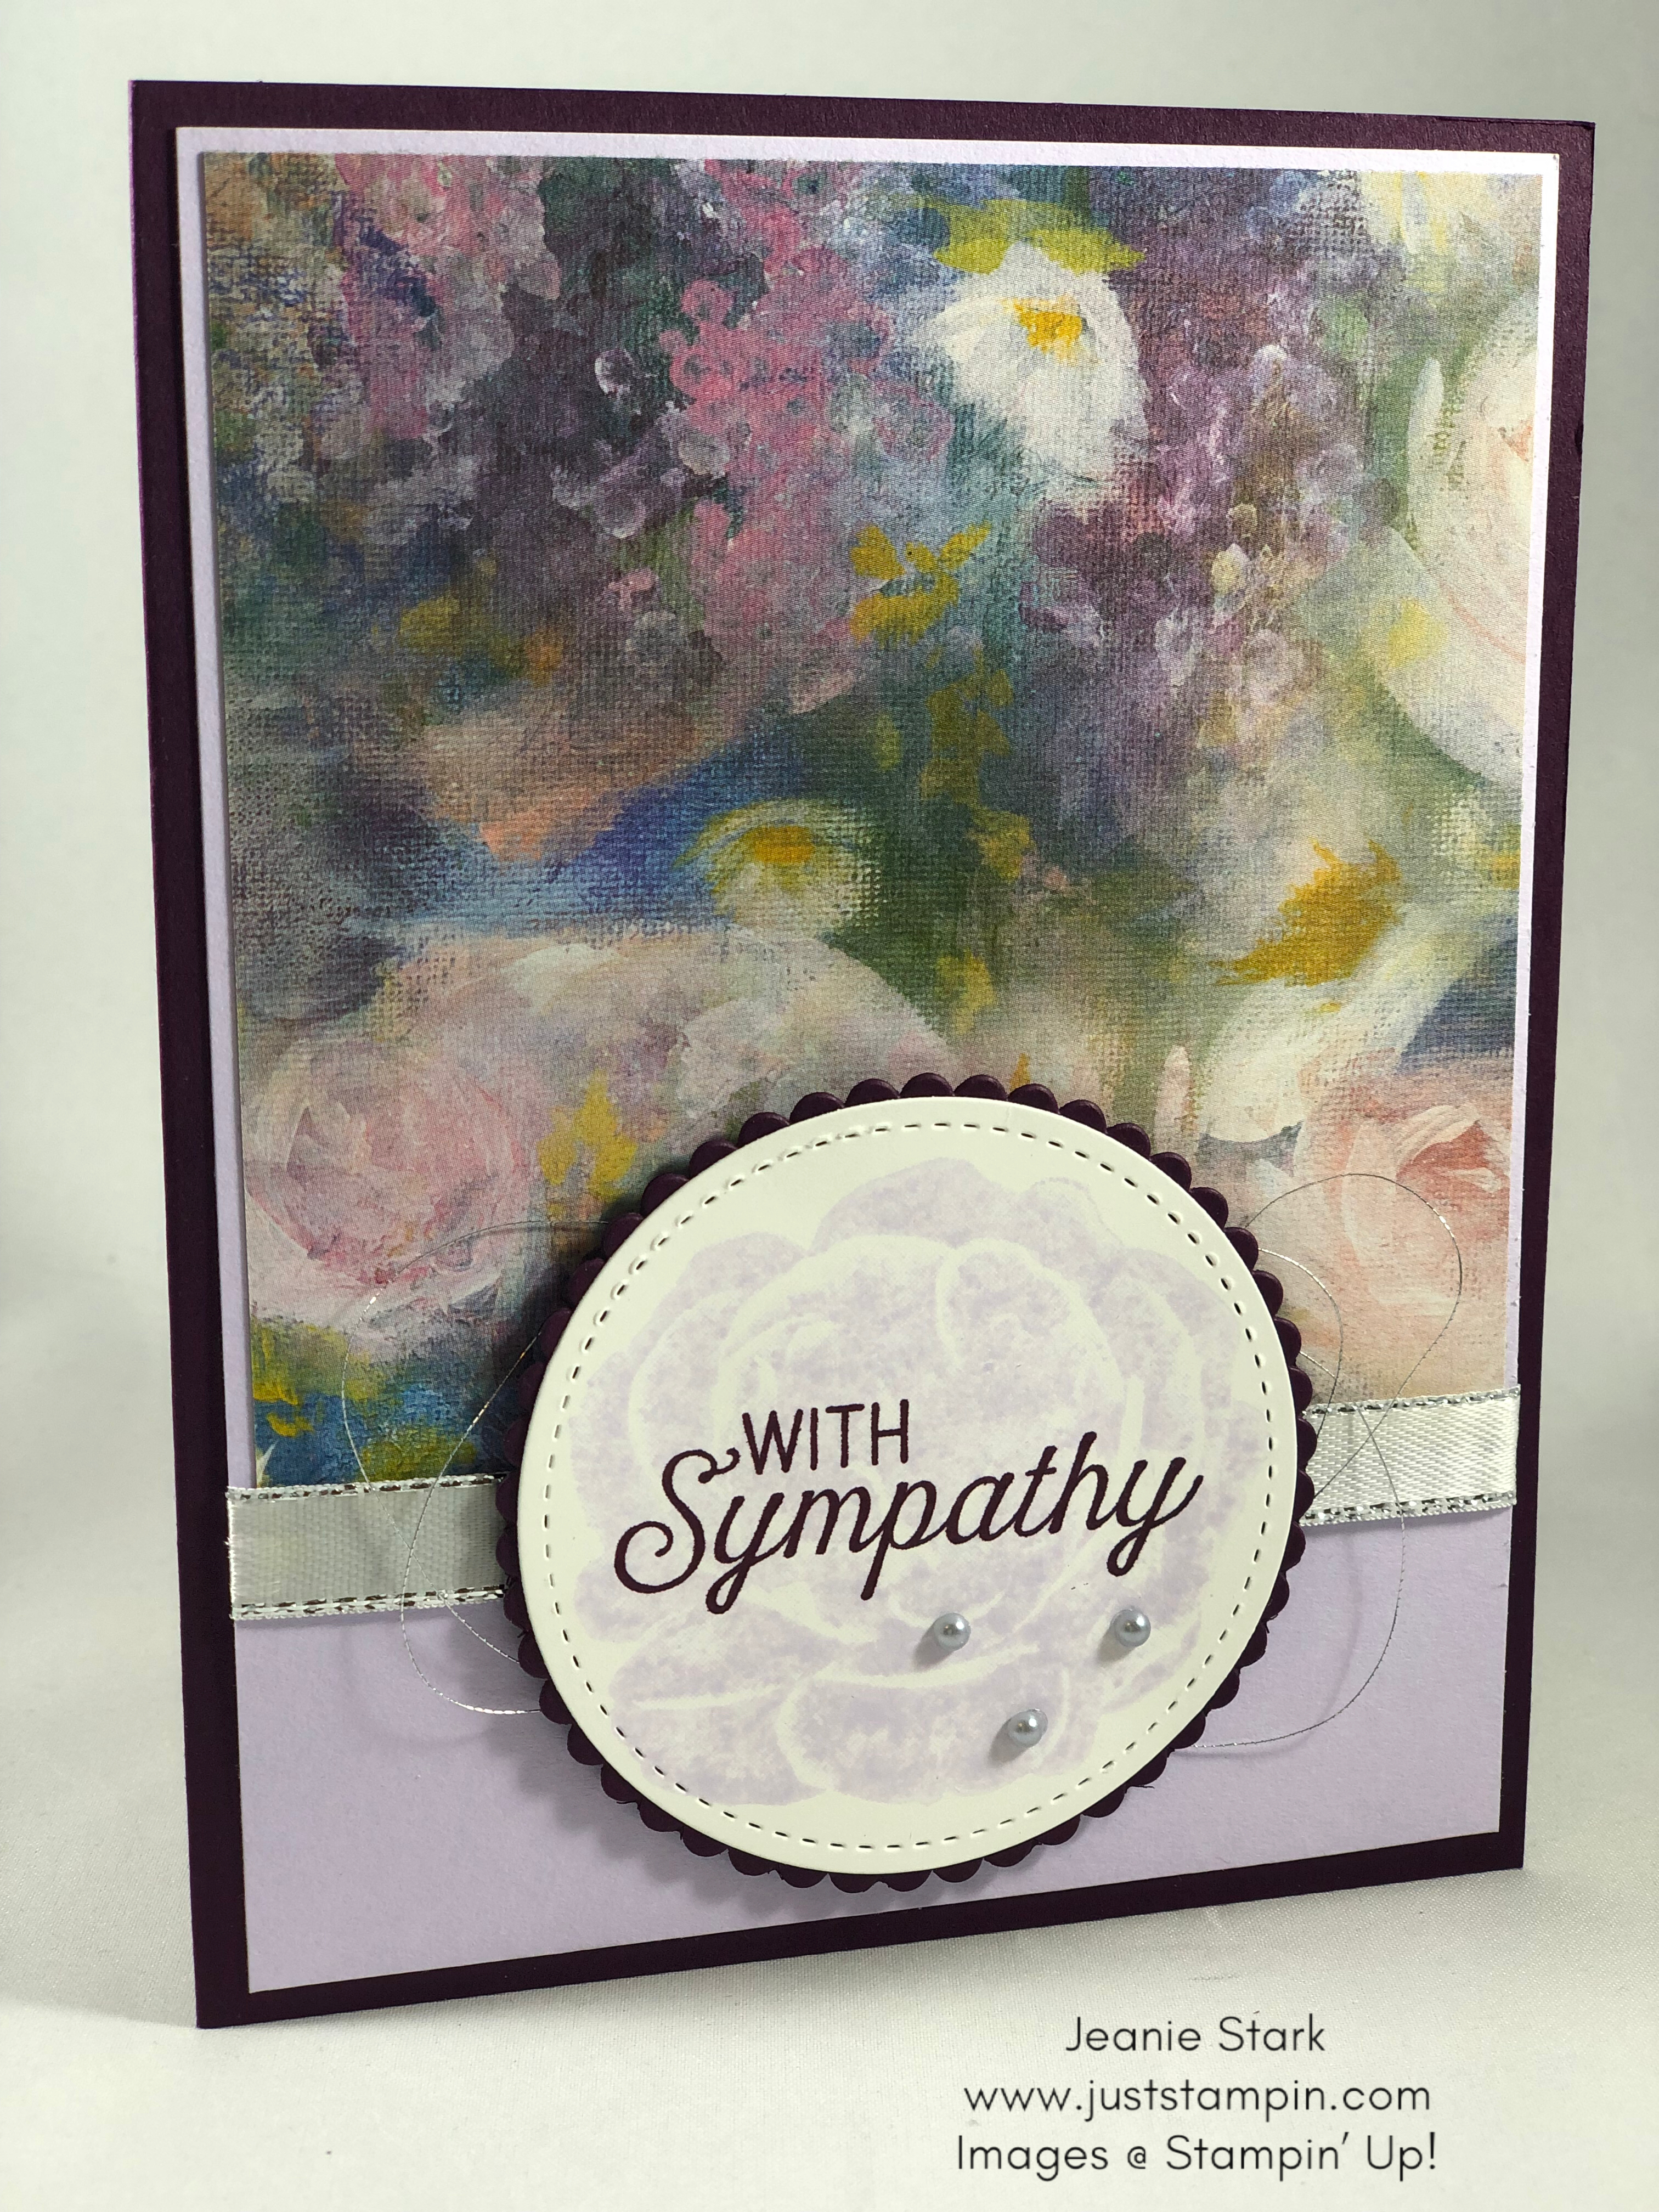 Stampin Up Flourishing Phrases and Healing Hugs Sympathy Card Idea using Perennial Essence Designer Series Paper - Jeanie Stark StampinUp